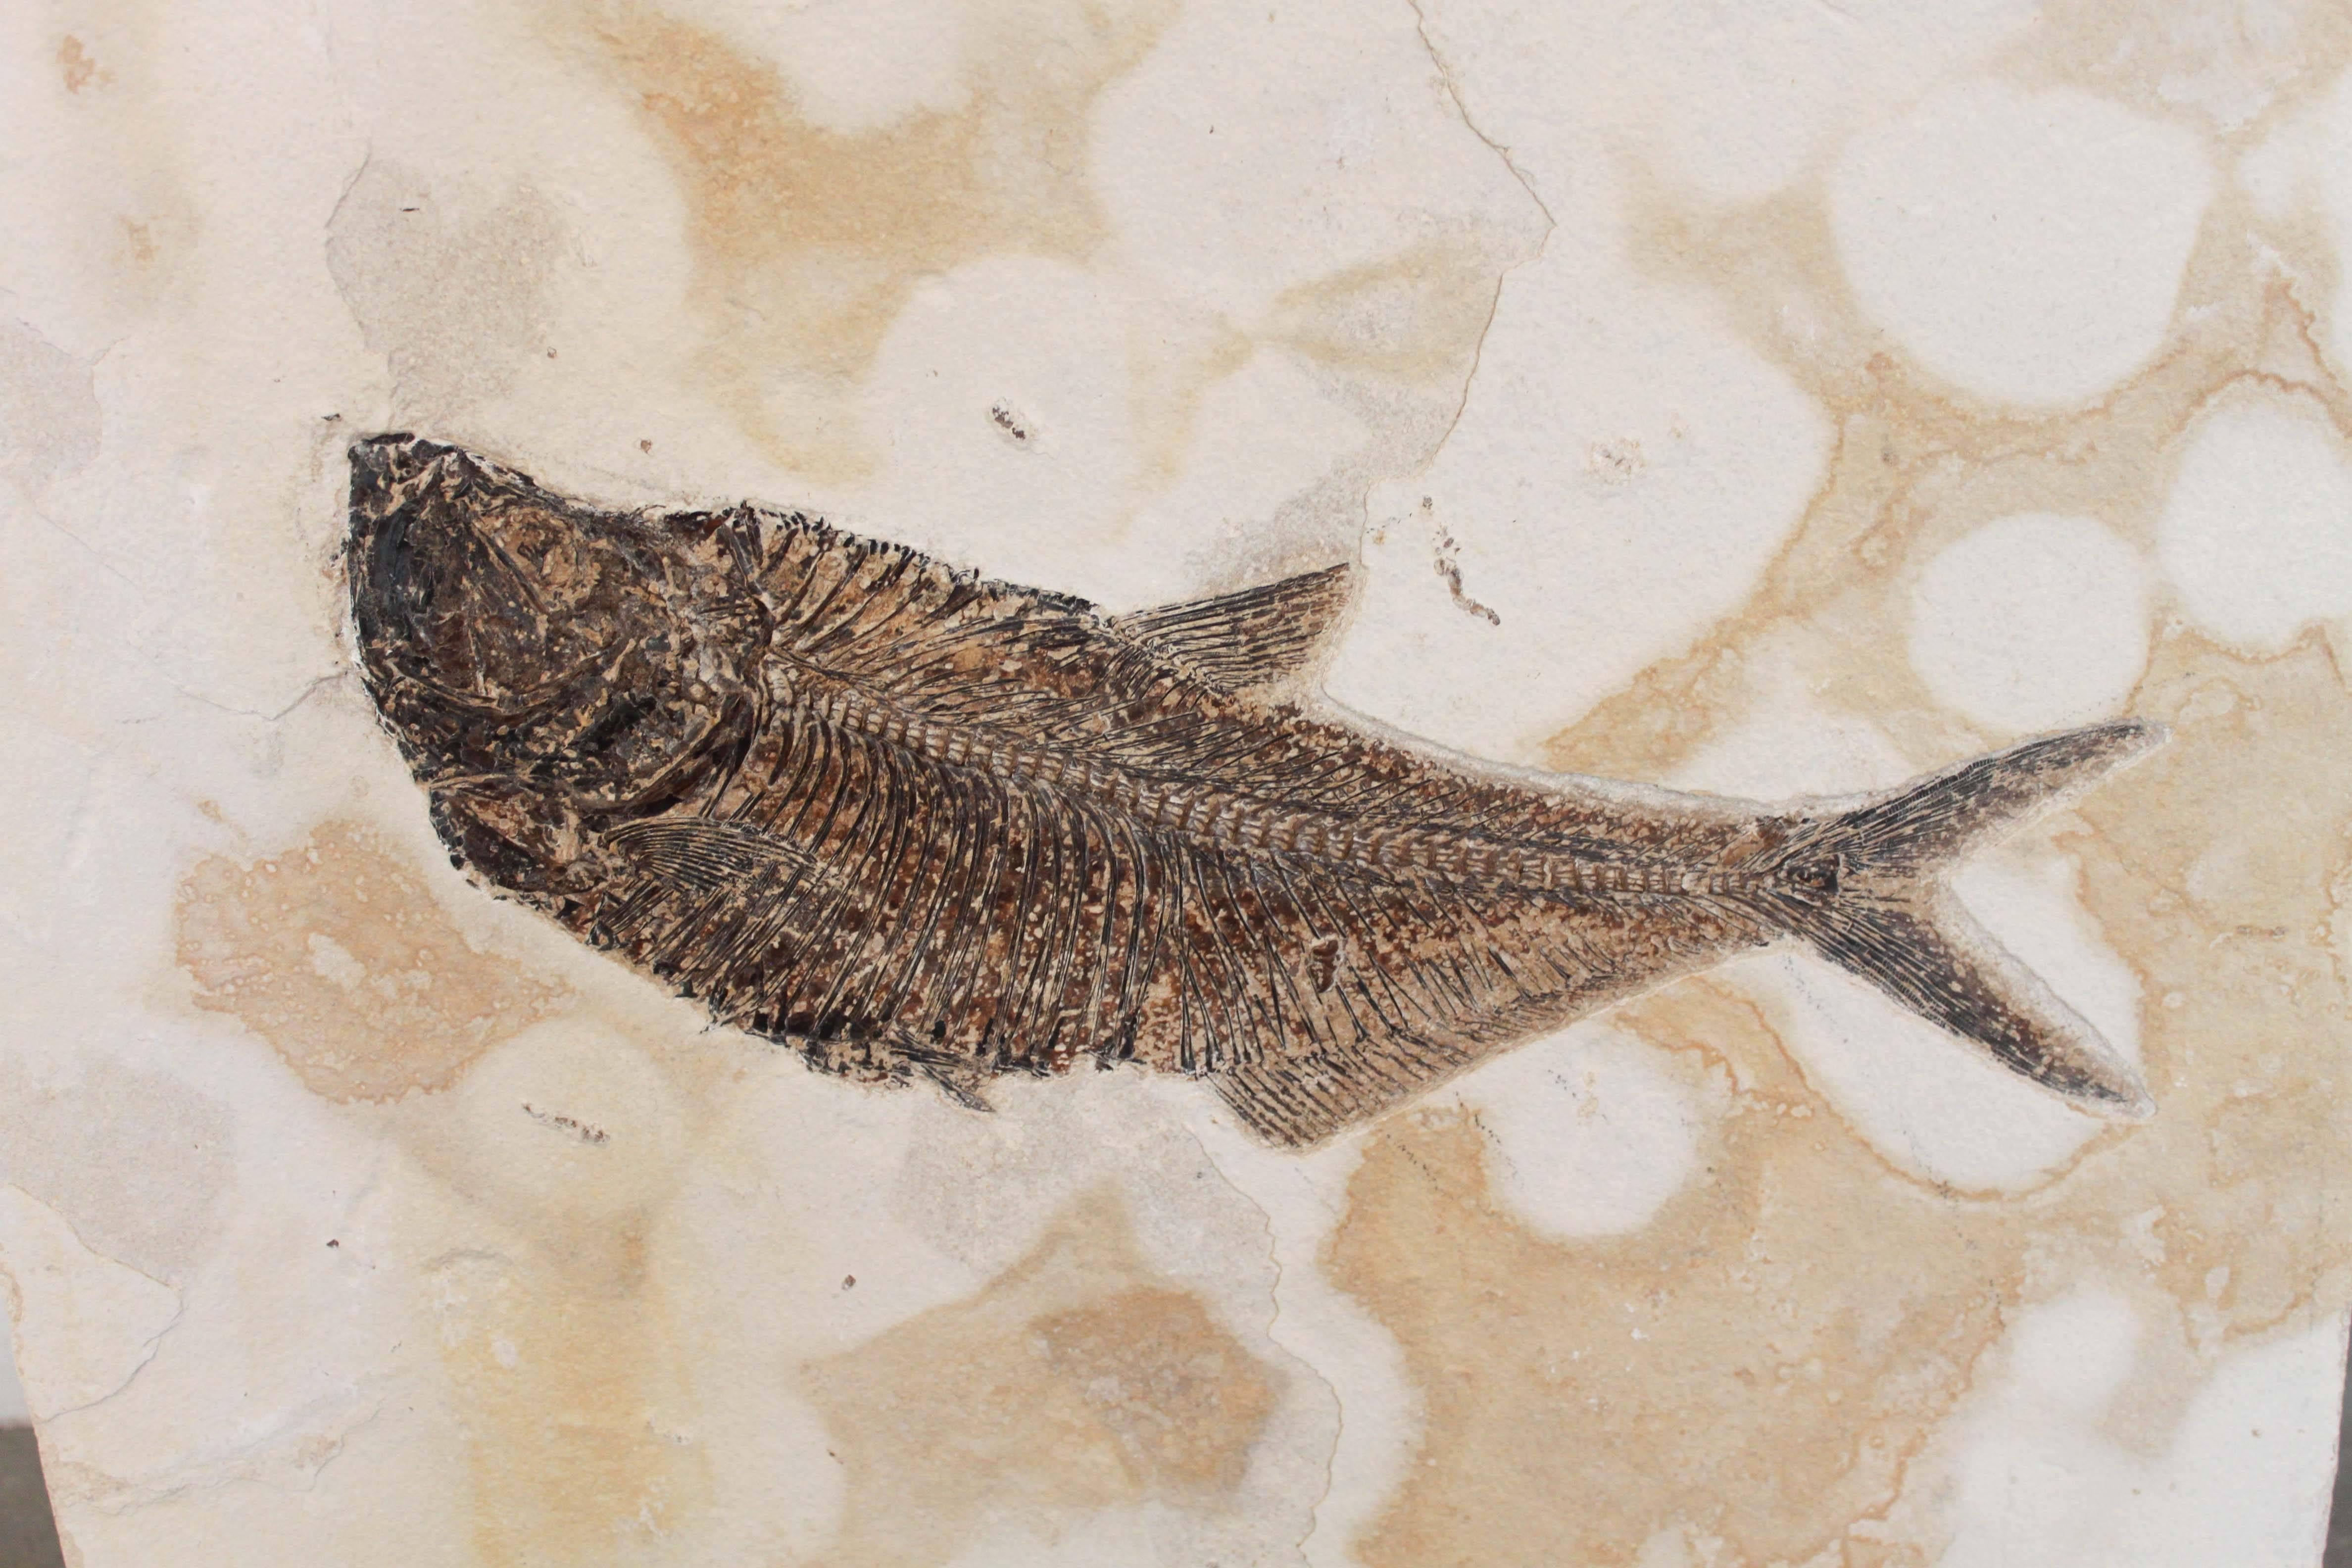 American Diplomystus Dentaus Fish Fossil Plate from the Green River Formation